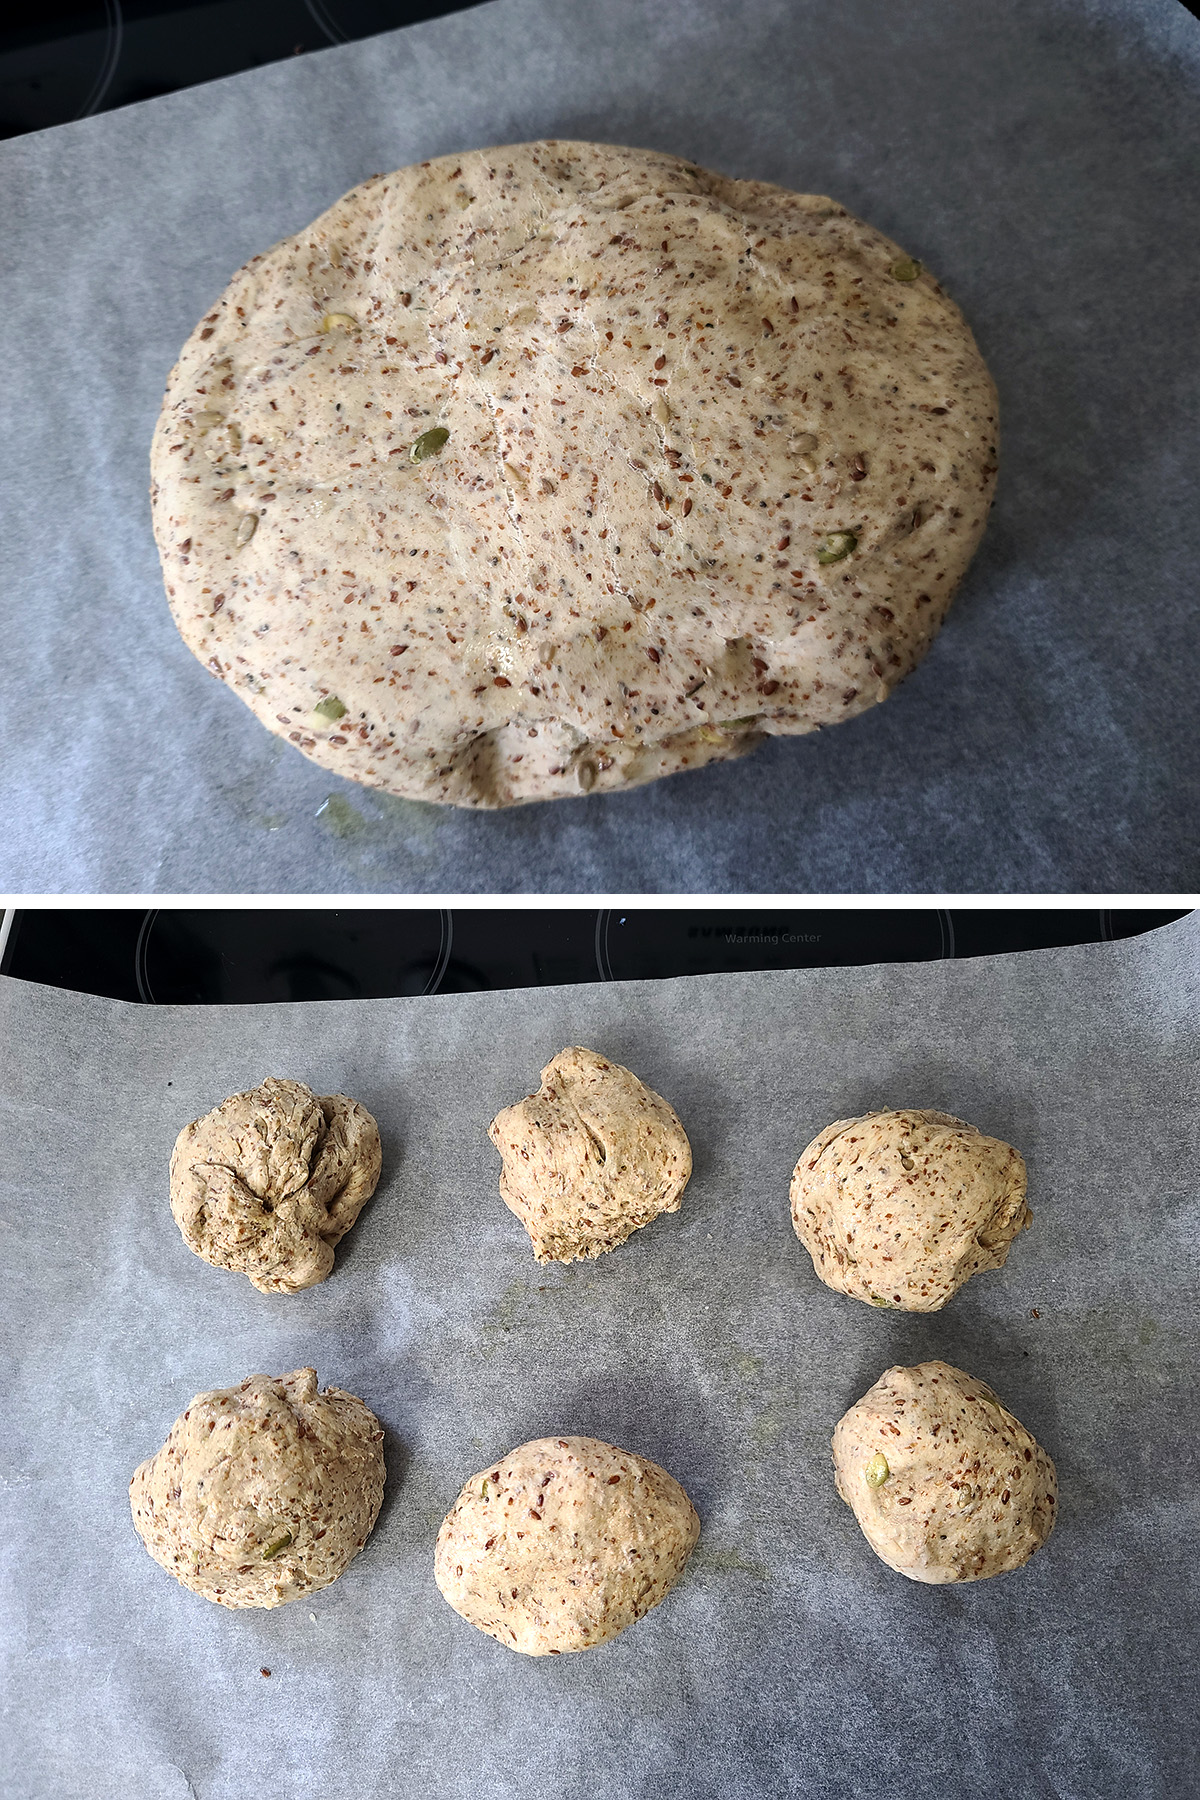 A two part photo showing the large ball of seeded whole wheat flax dough dumped out on a sheet of parchment, then after it's been divided into 6 balls.